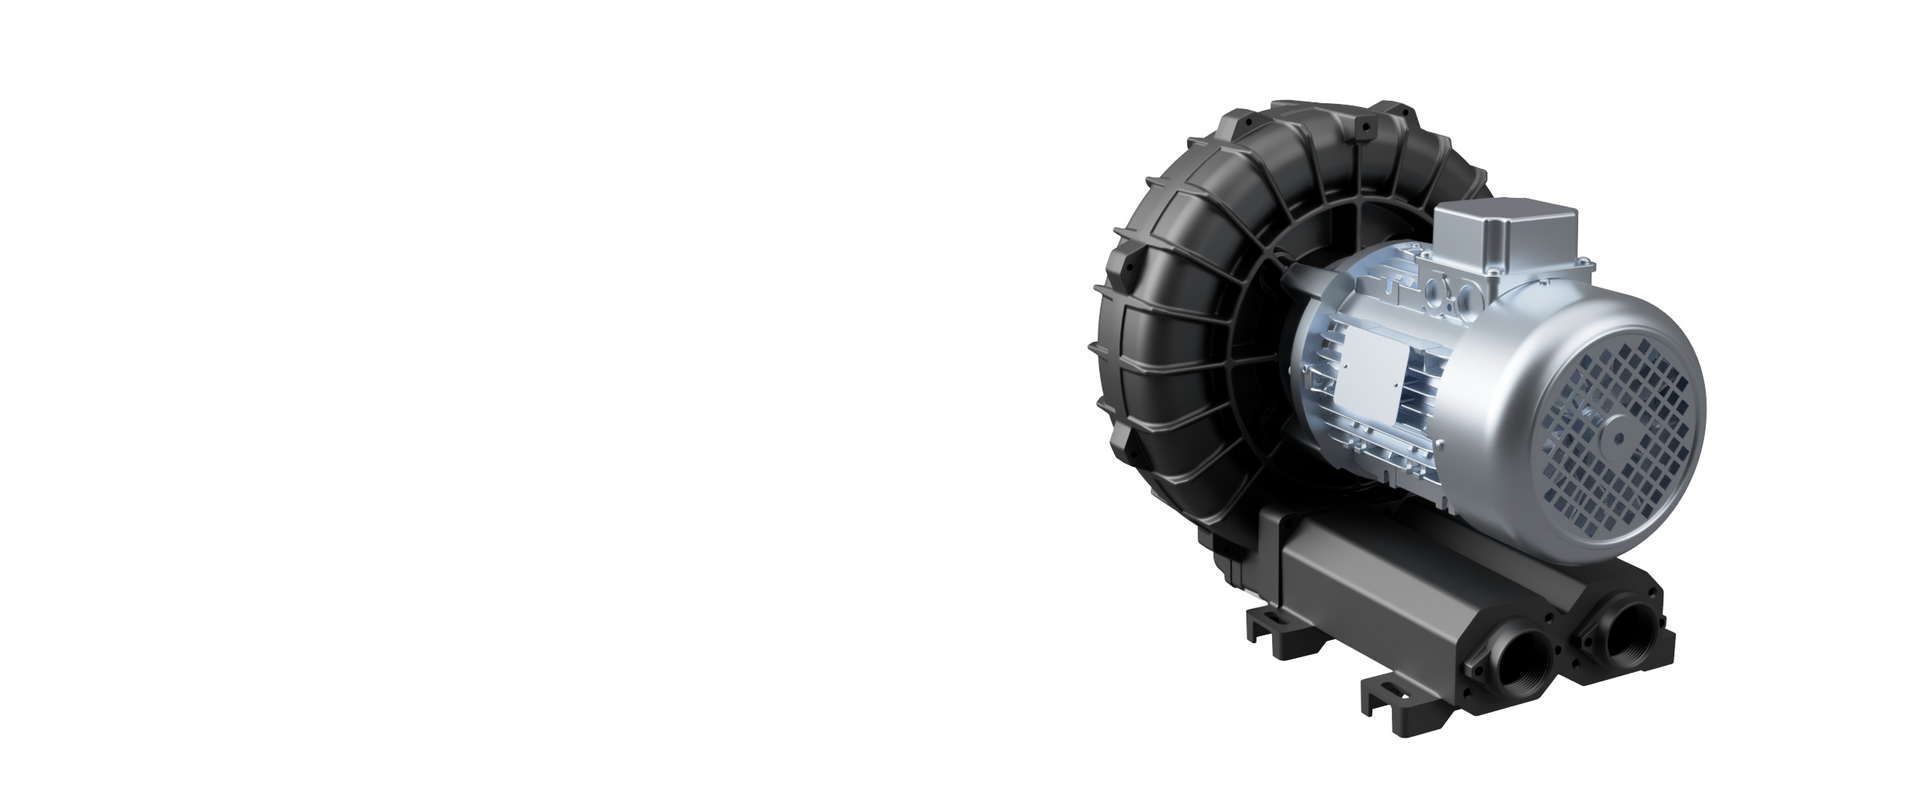 A close up render of a blower on a white background.